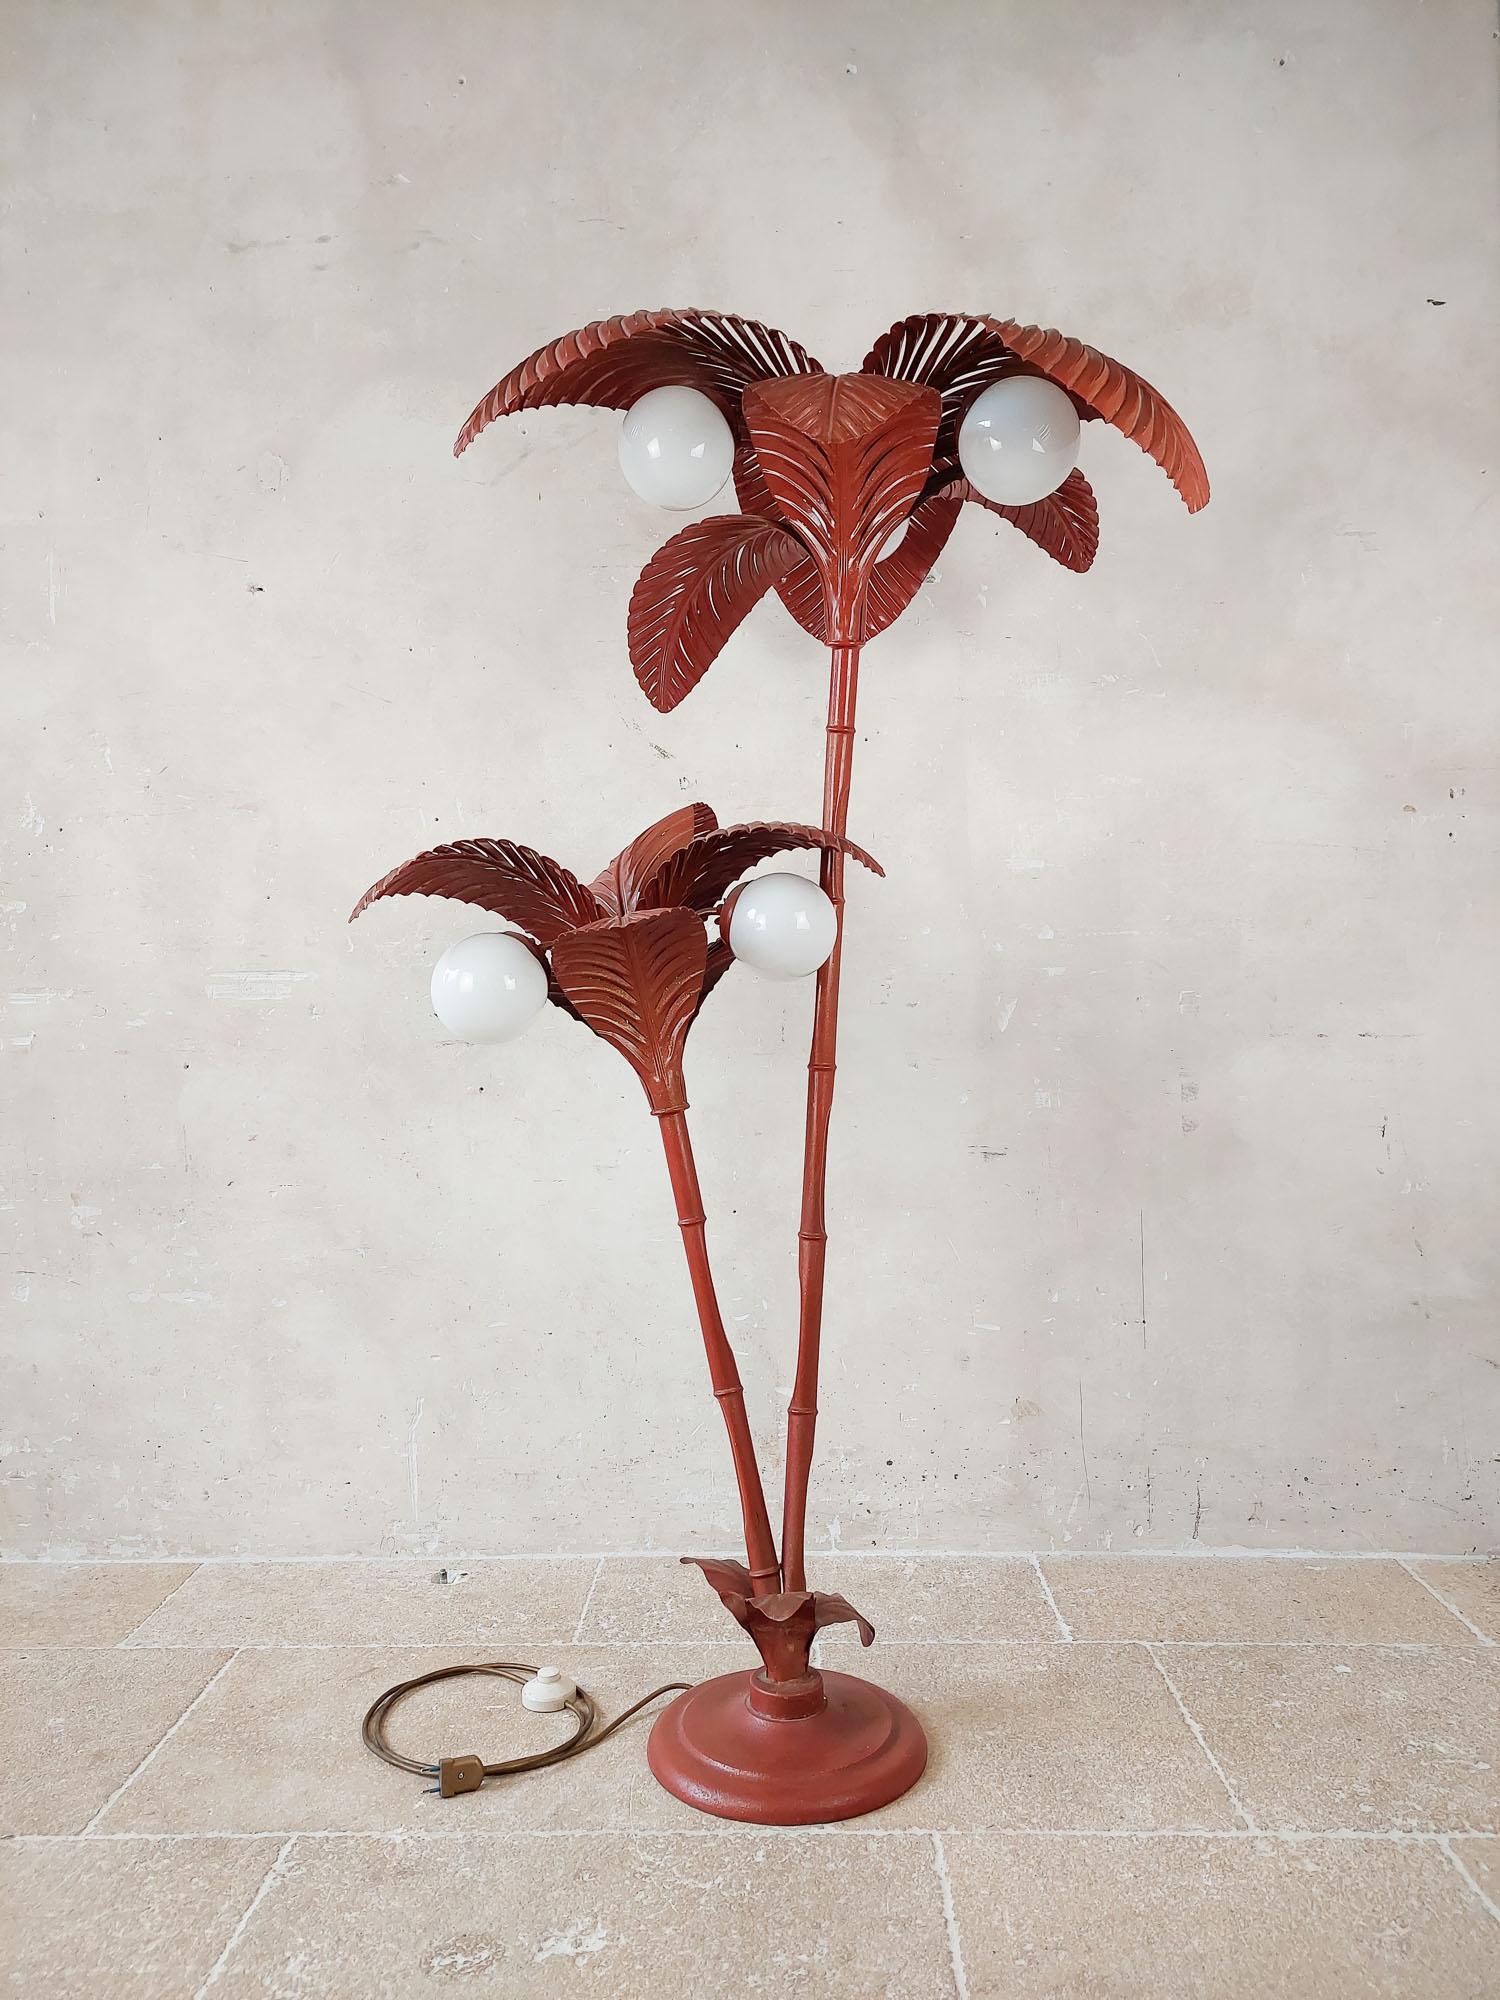 Red palm tree floor lamp by Sergio Terzani 1970s Florence, Italy.
Made of red lacquered metal with two trunks, each with six palm leaves and 3 light points under opaline glass spheres.
This very decorative vintage lamp would fit in different